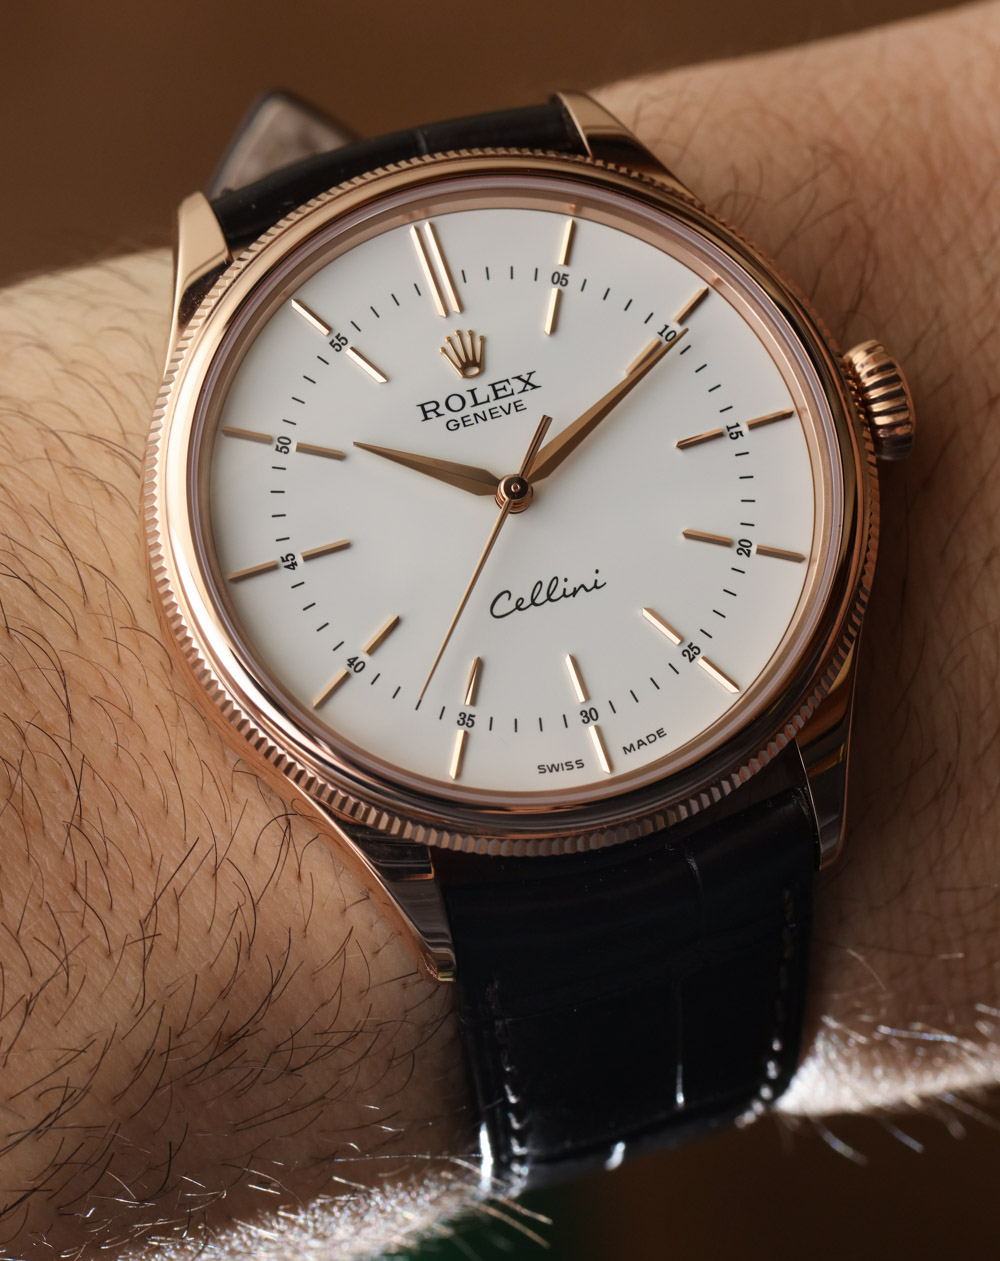 Rolex Cellini Time Watch For 2016 With 